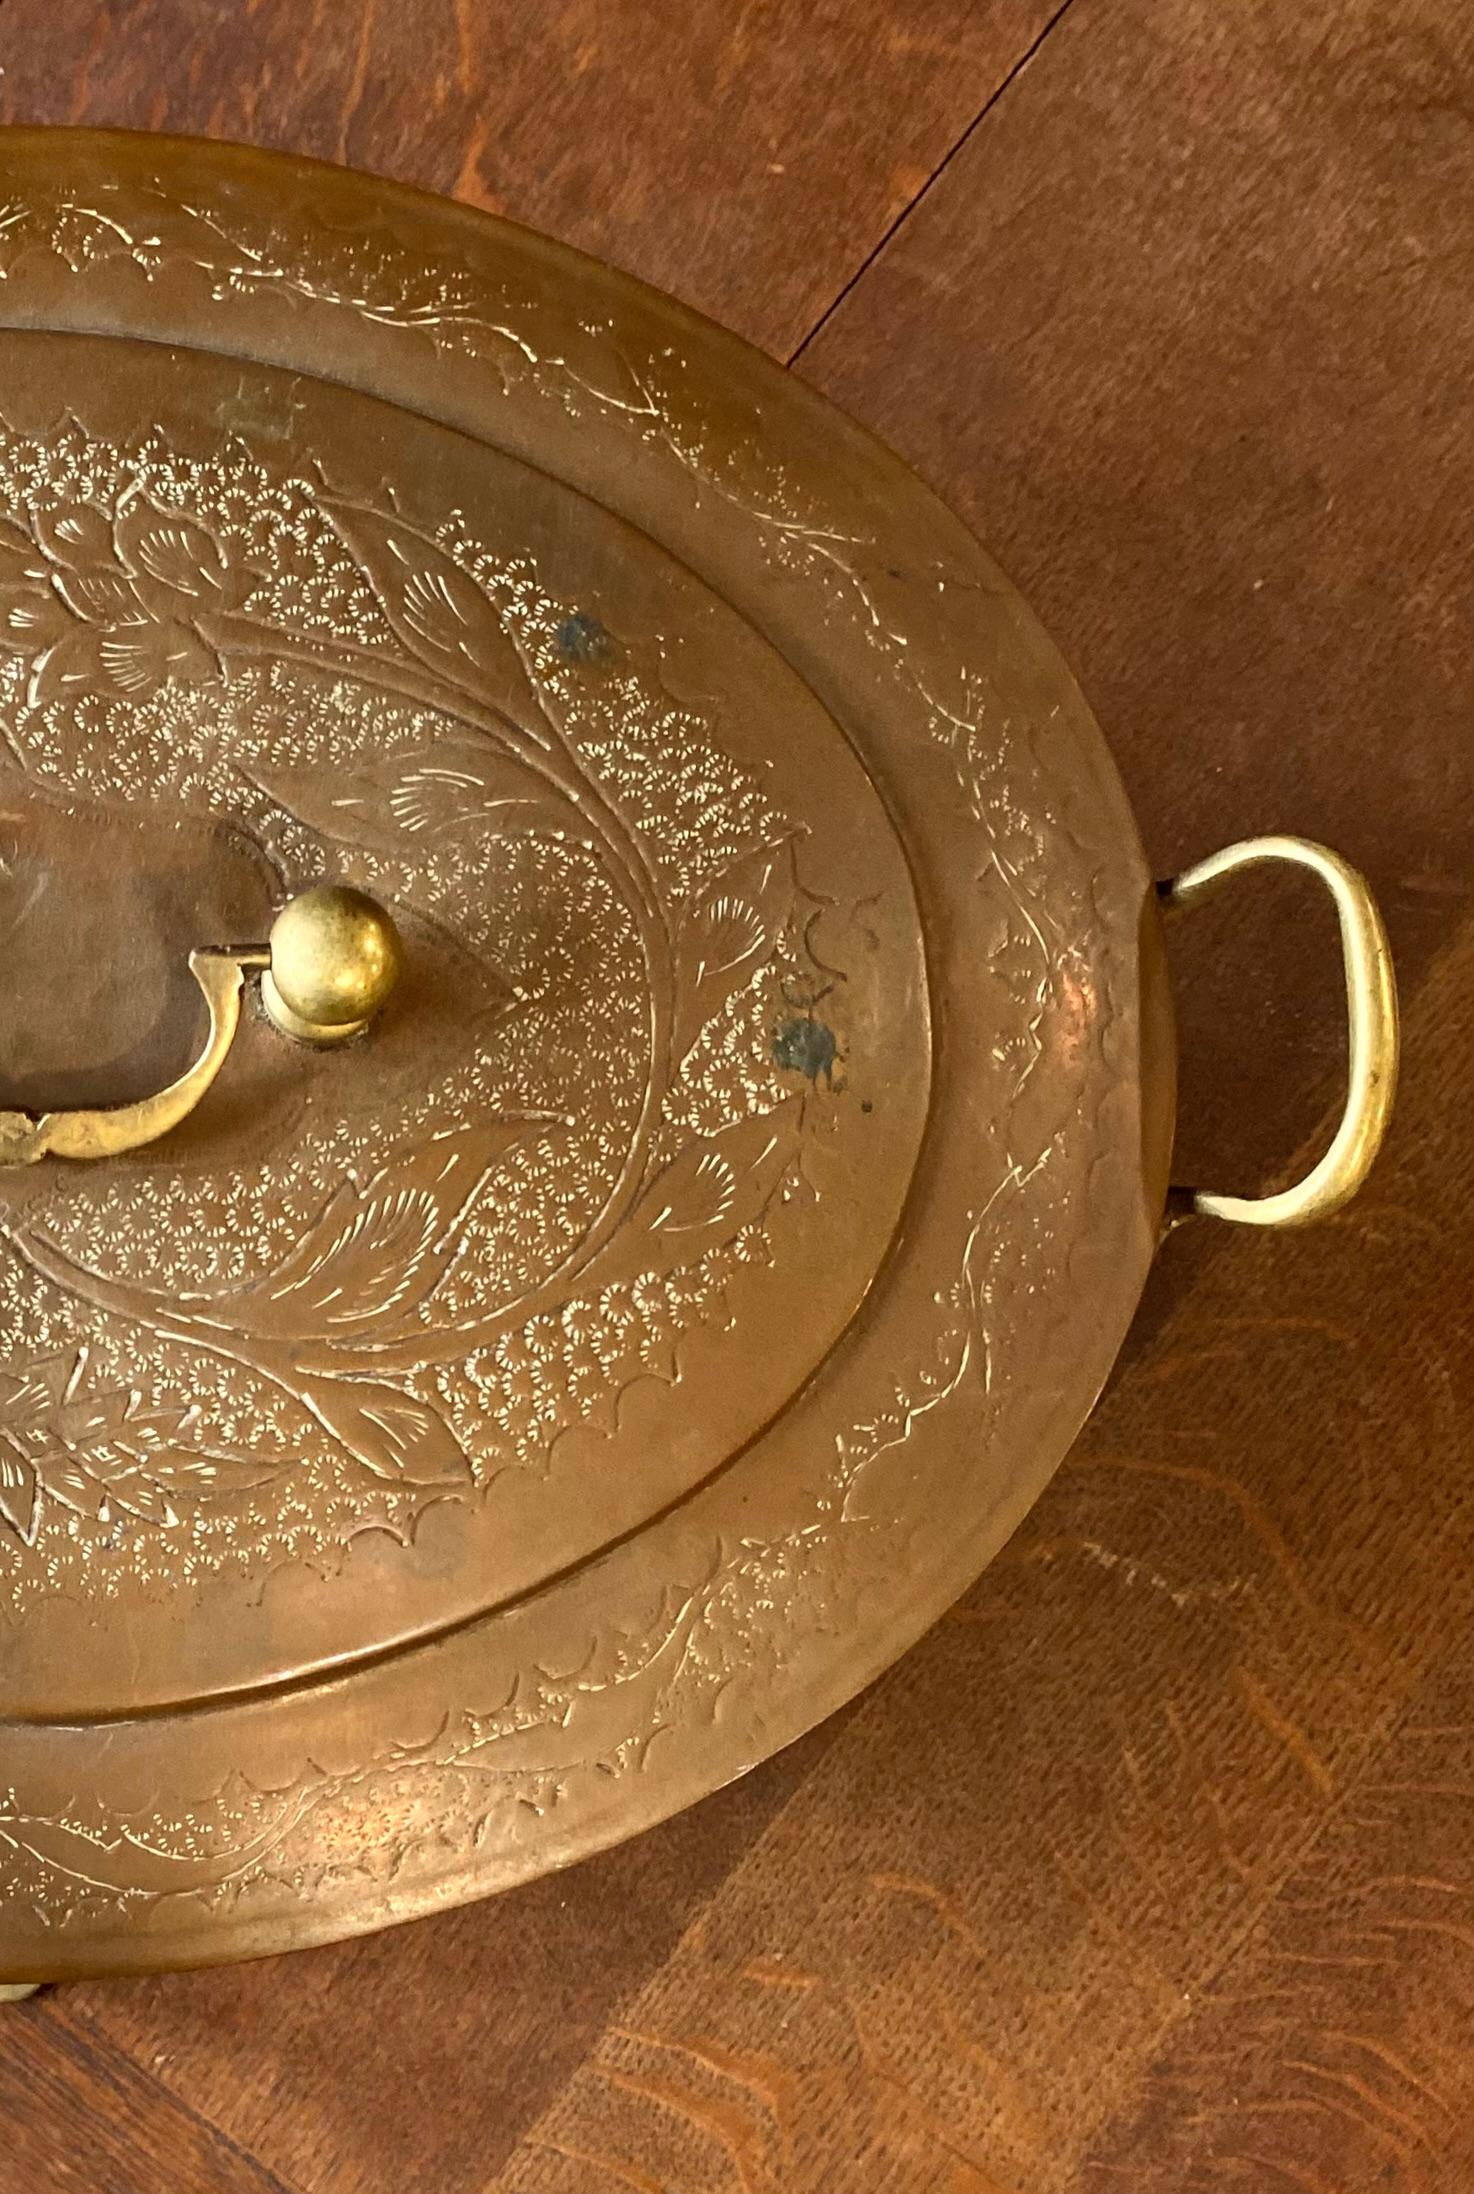 Egyptian Vintage Engraved Copper and Brass Tin Lined Chafing Dish  For Sale